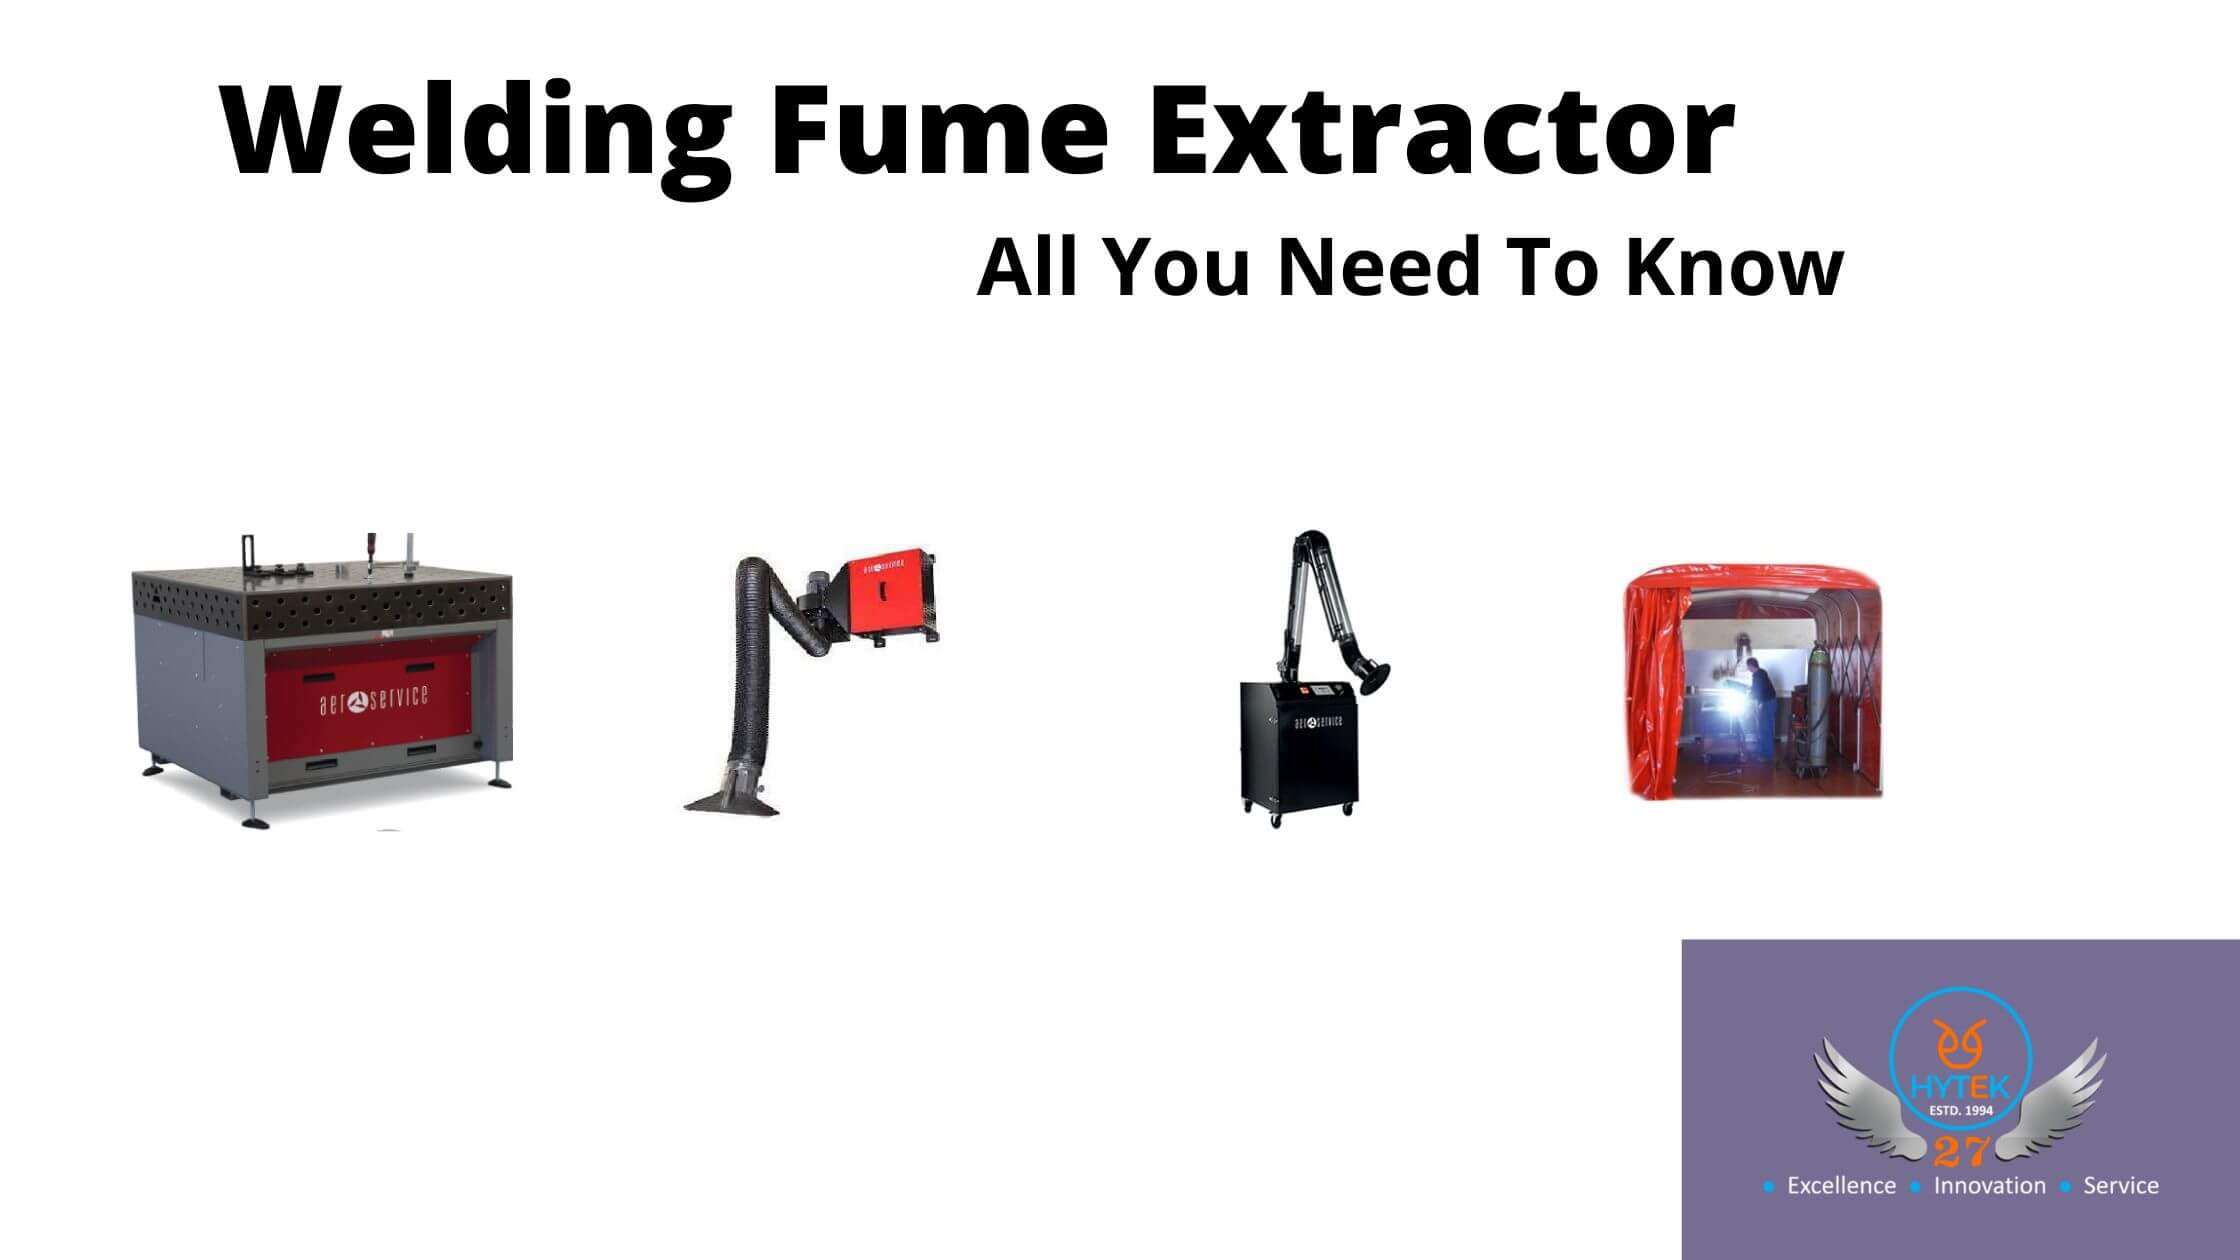 All You Need To Know About Before Buying The Welding Fume Extractor